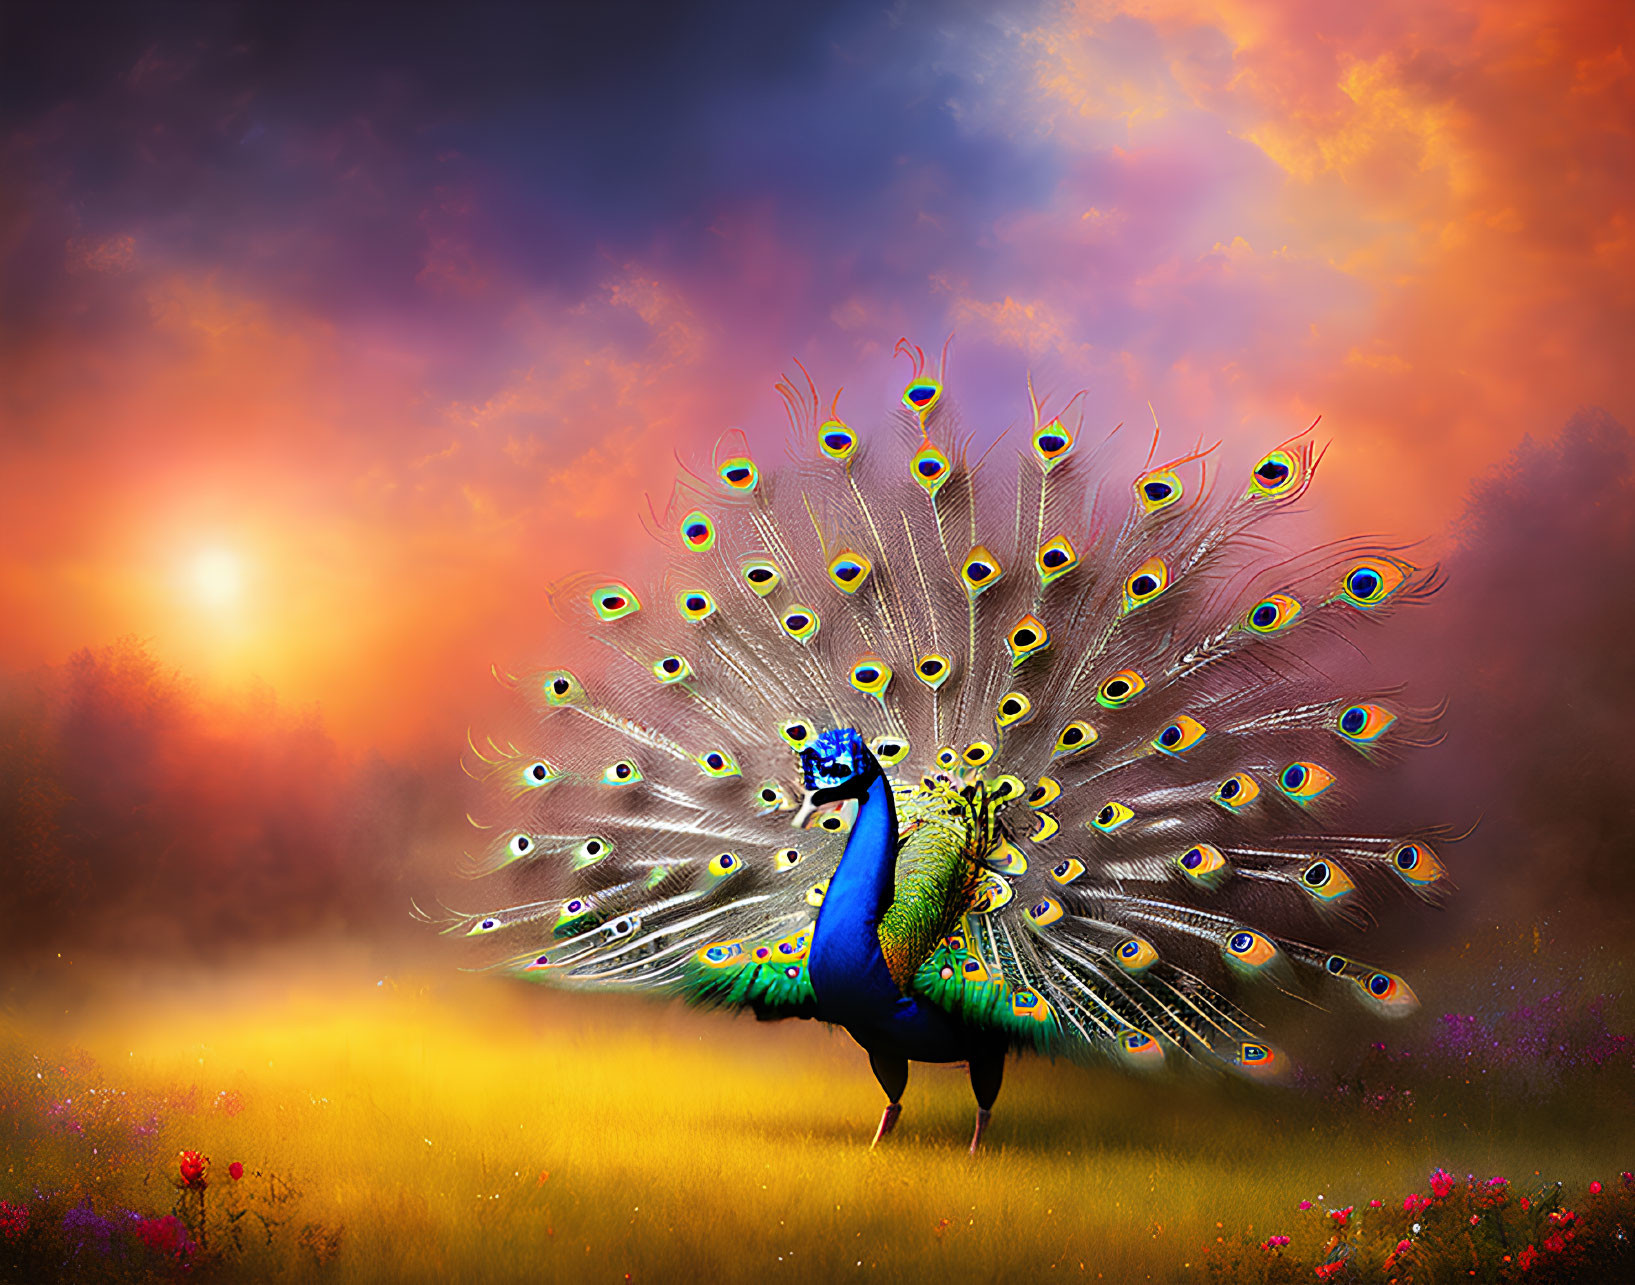 Colorful peacock showcasing feathers against sunset sky and foliage.